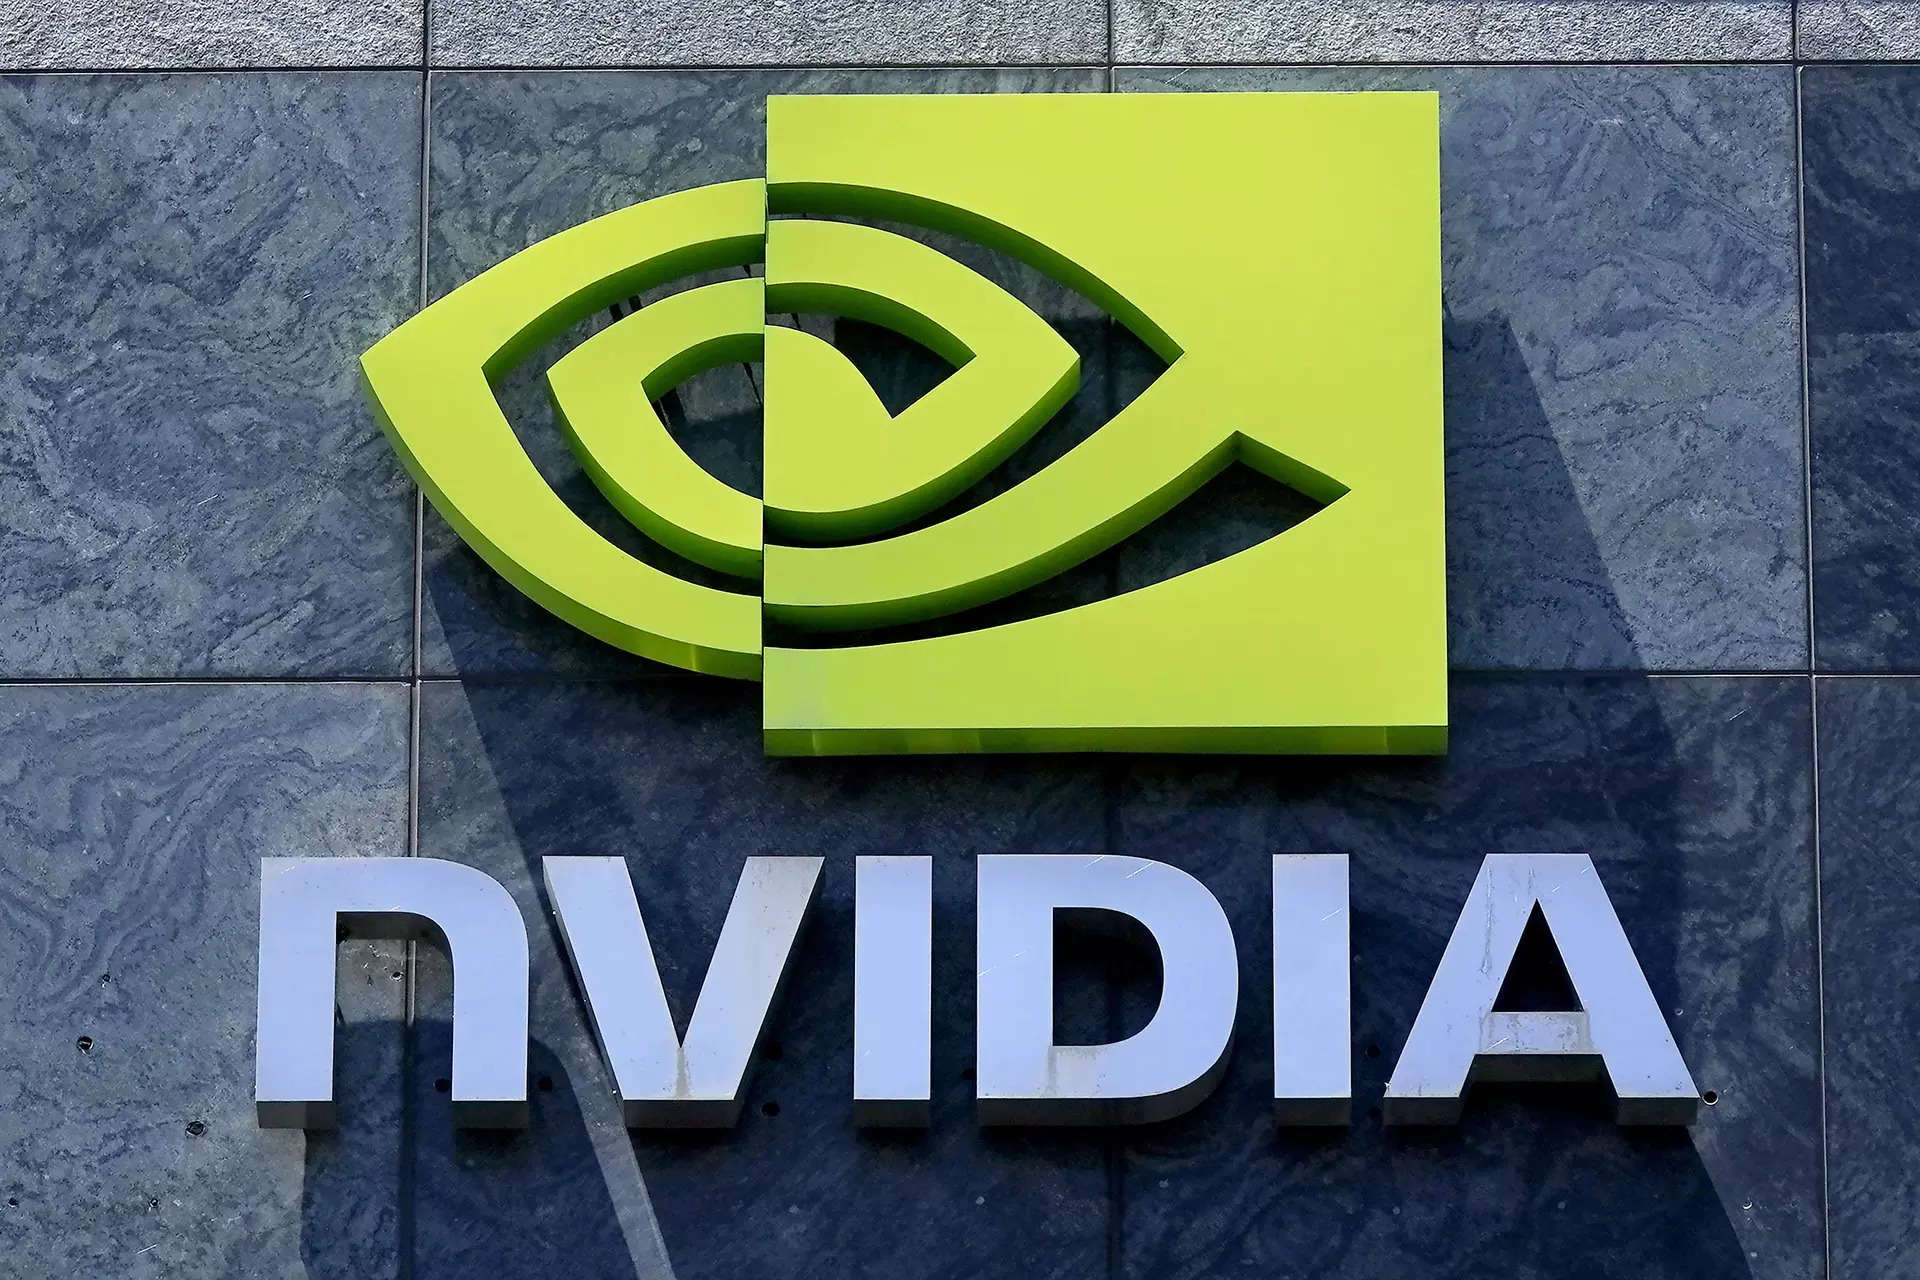 Short bets against Nvidia stand at $34 billion, S3 Partners says 